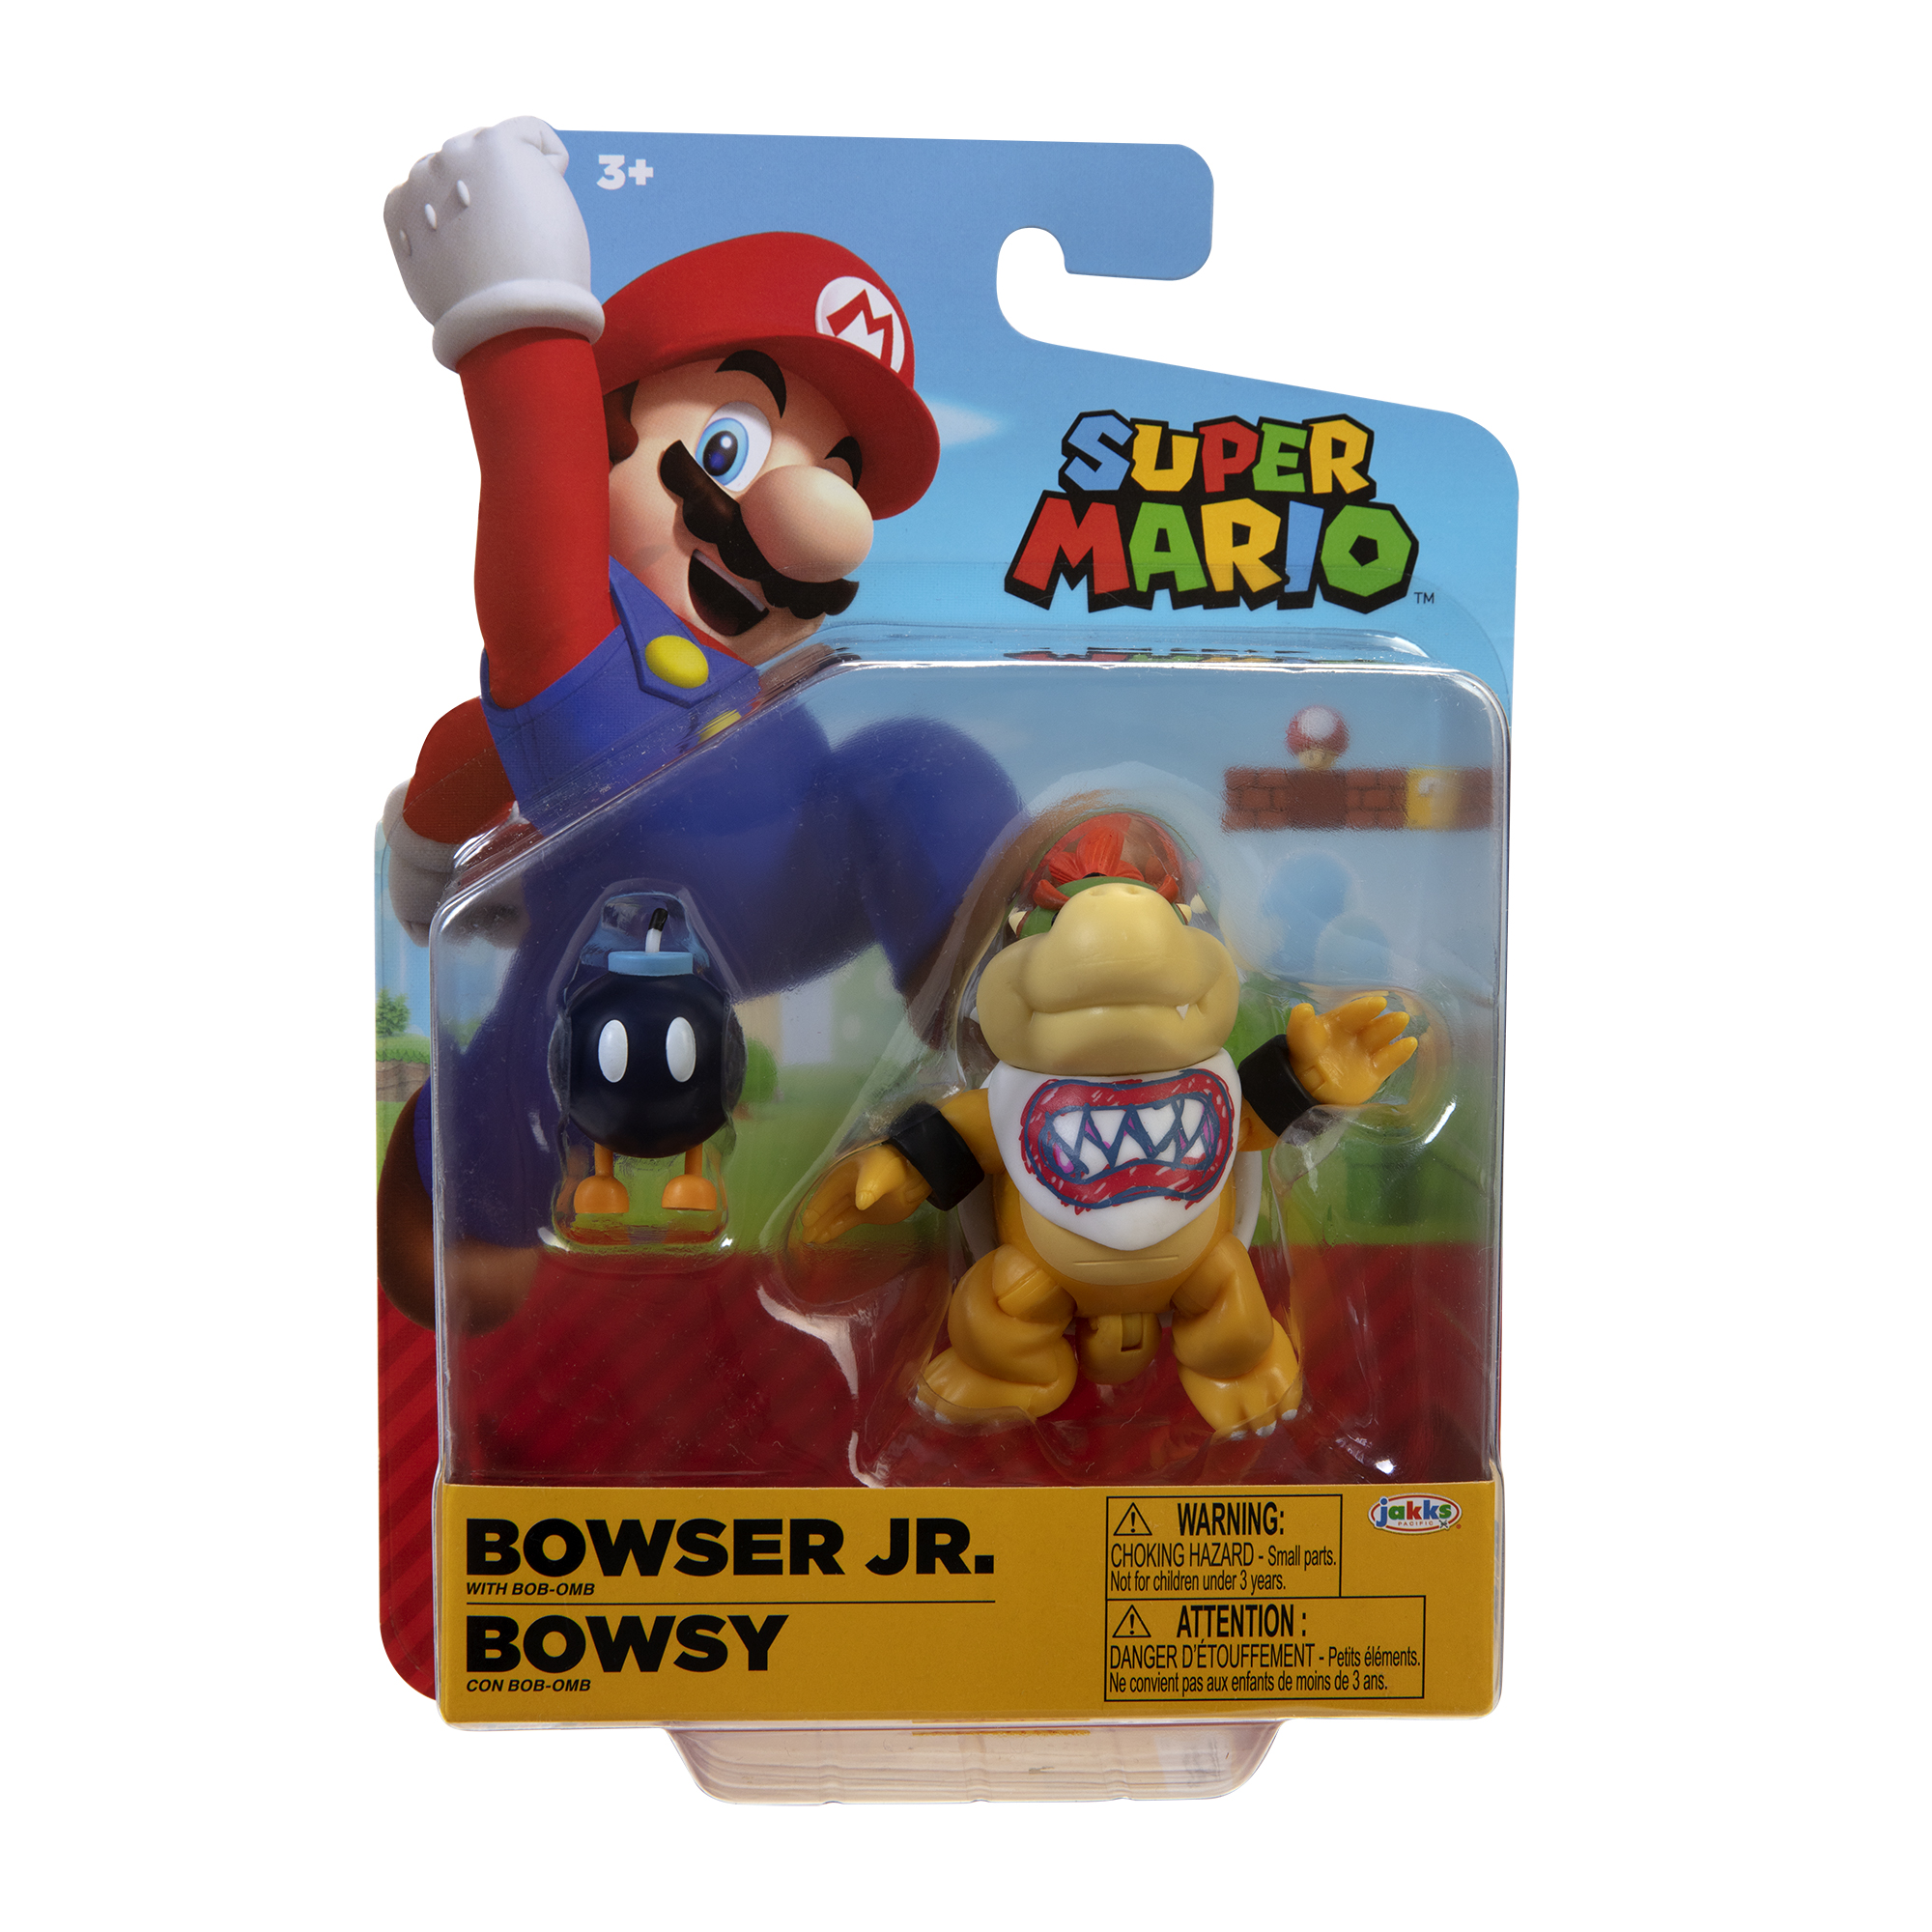 Super Mario Bowser Jr. 4-Inch Action Figure with Bob-Omb Accessory,  Poseable Articulated Collectible Toys, Perfect for Kids & Collectors Alike!  For